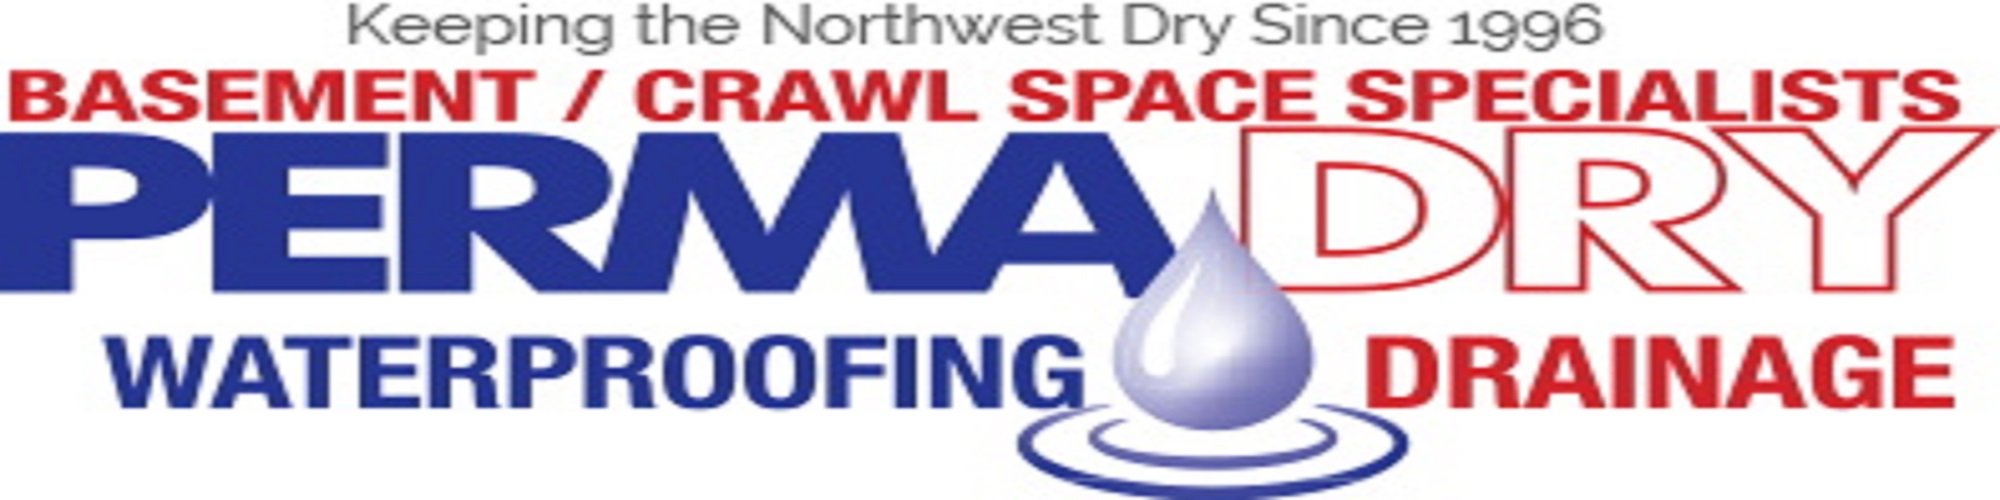 Perma Dry Waterproofing &amp; Drainage cover